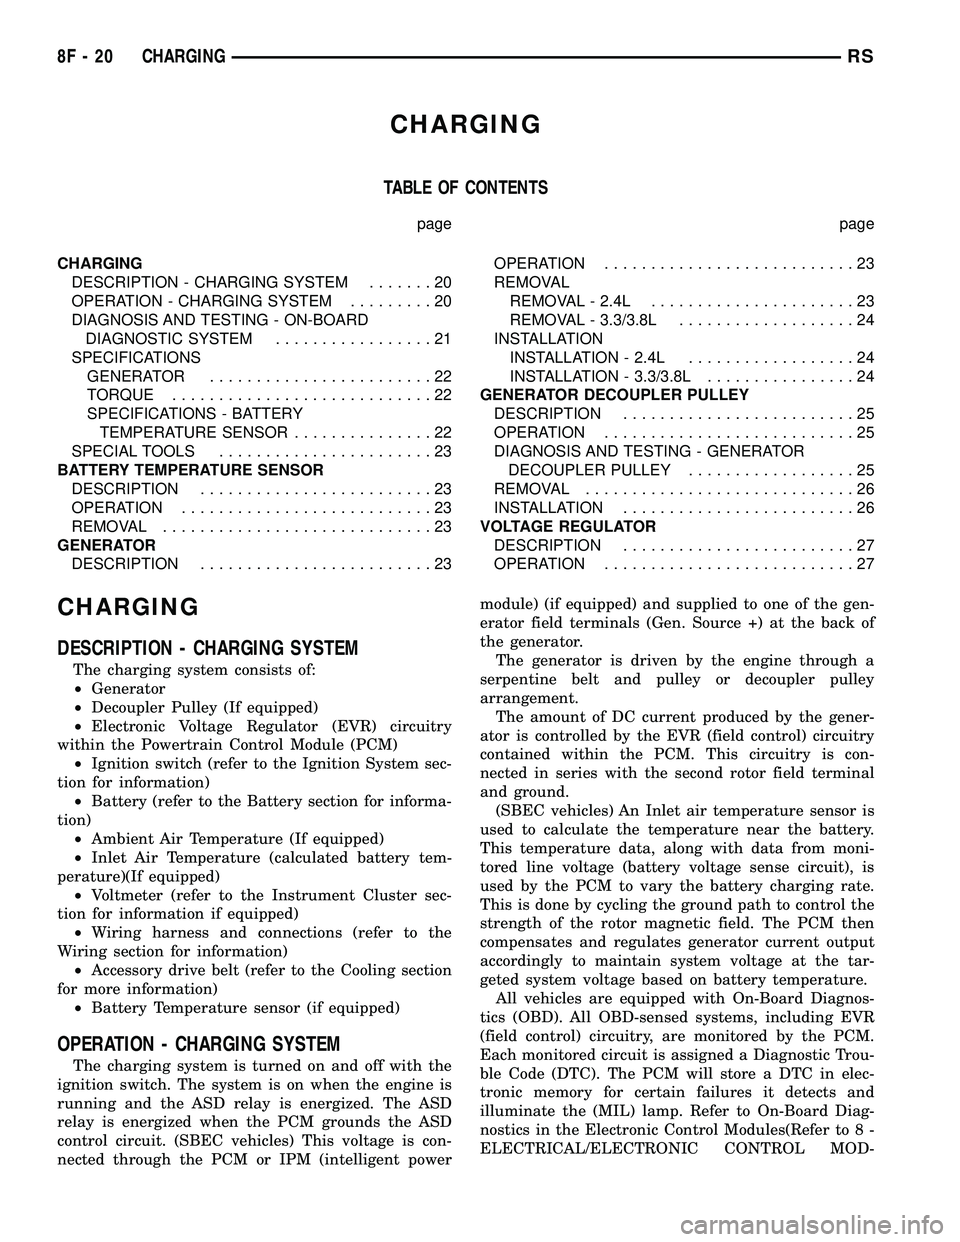 CHRYSLER VOYAGER 2004  Service Manual CHARGING
TABLE OF CONTENTS
page page
CHARGING
DESCRIPTION - CHARGING SYSTEM.......20
OPERATION - CHARGING SYSTEM.........20
DIAGNOSIS AND TESTING - ON-BOARD
DIAGNOSTIC SYSTEM.................21
SPECIF